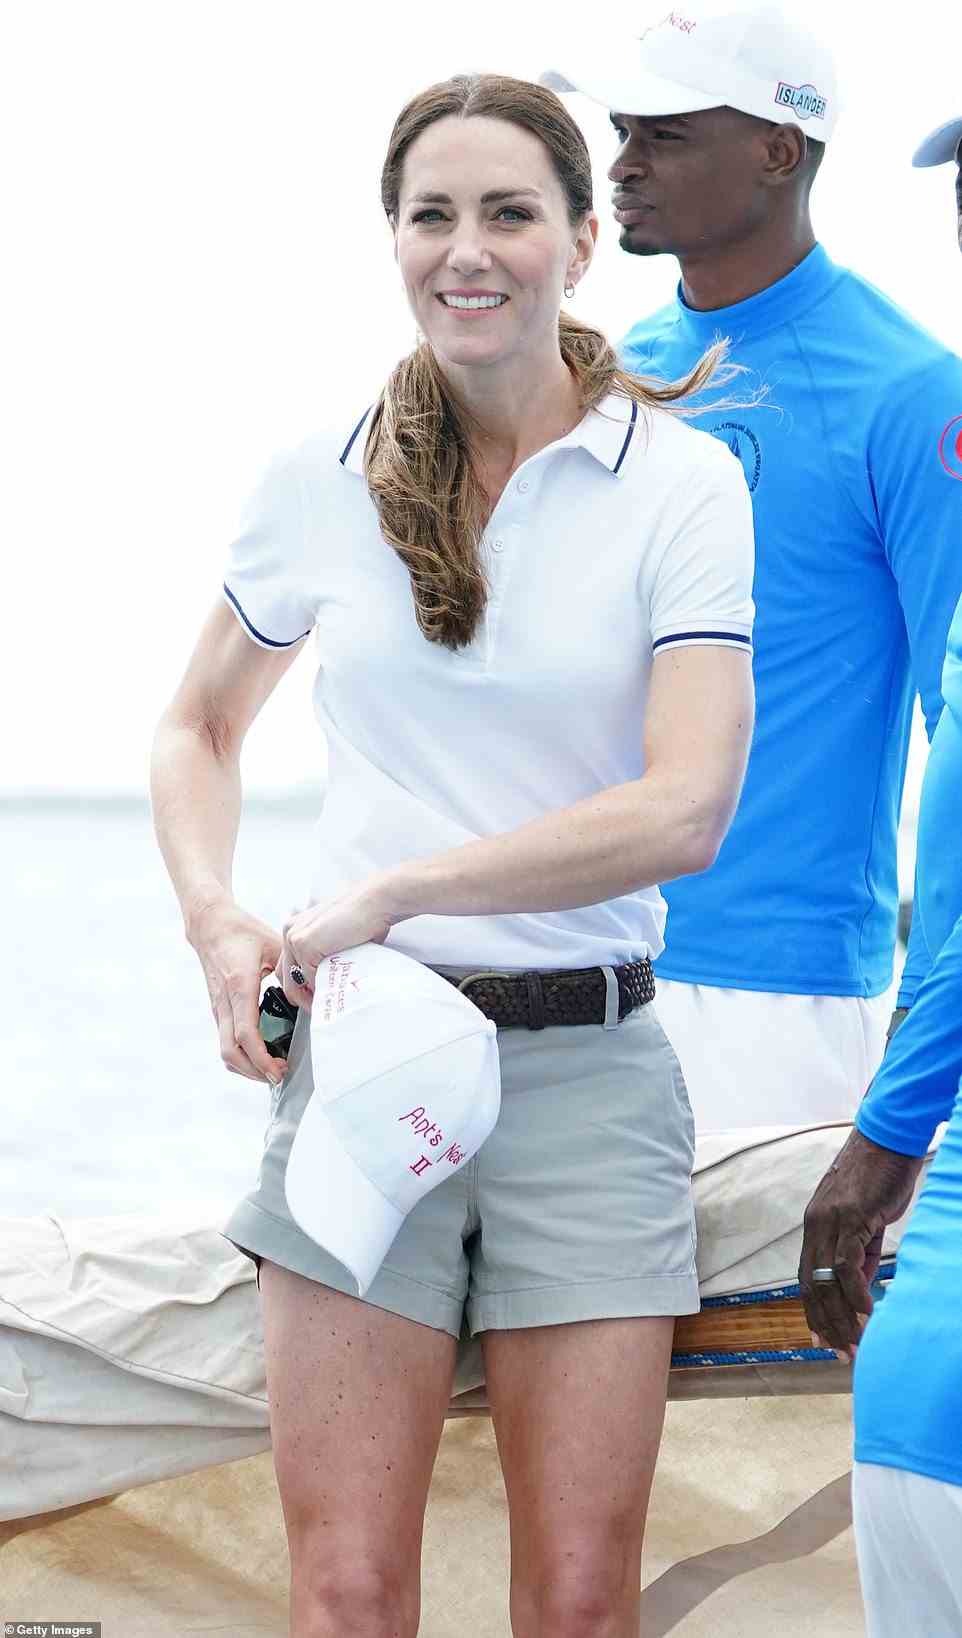 Kate is pictured onboard a boat from the Bahamas Platinum Jubilee Sailing Regatta at Montagu Bay, one of the first sailing regattas in the Bahamas since the start of the pandemic